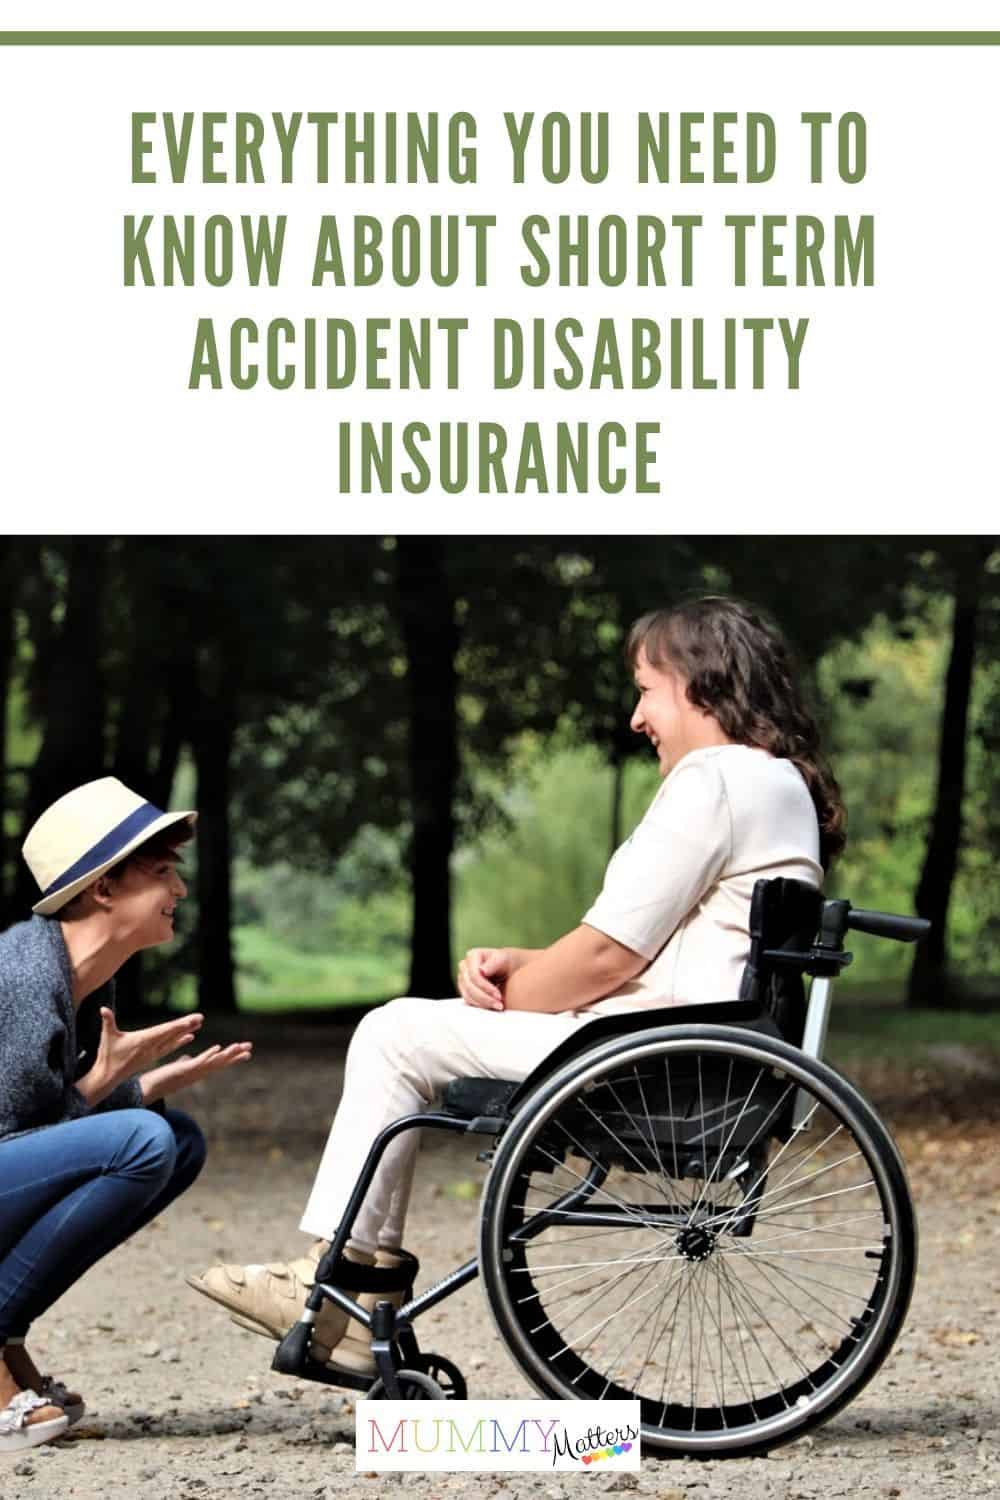 Disability insurance policies can be divided into long term disability insurance and short term accident disability insurance. We discuss them in detail here.